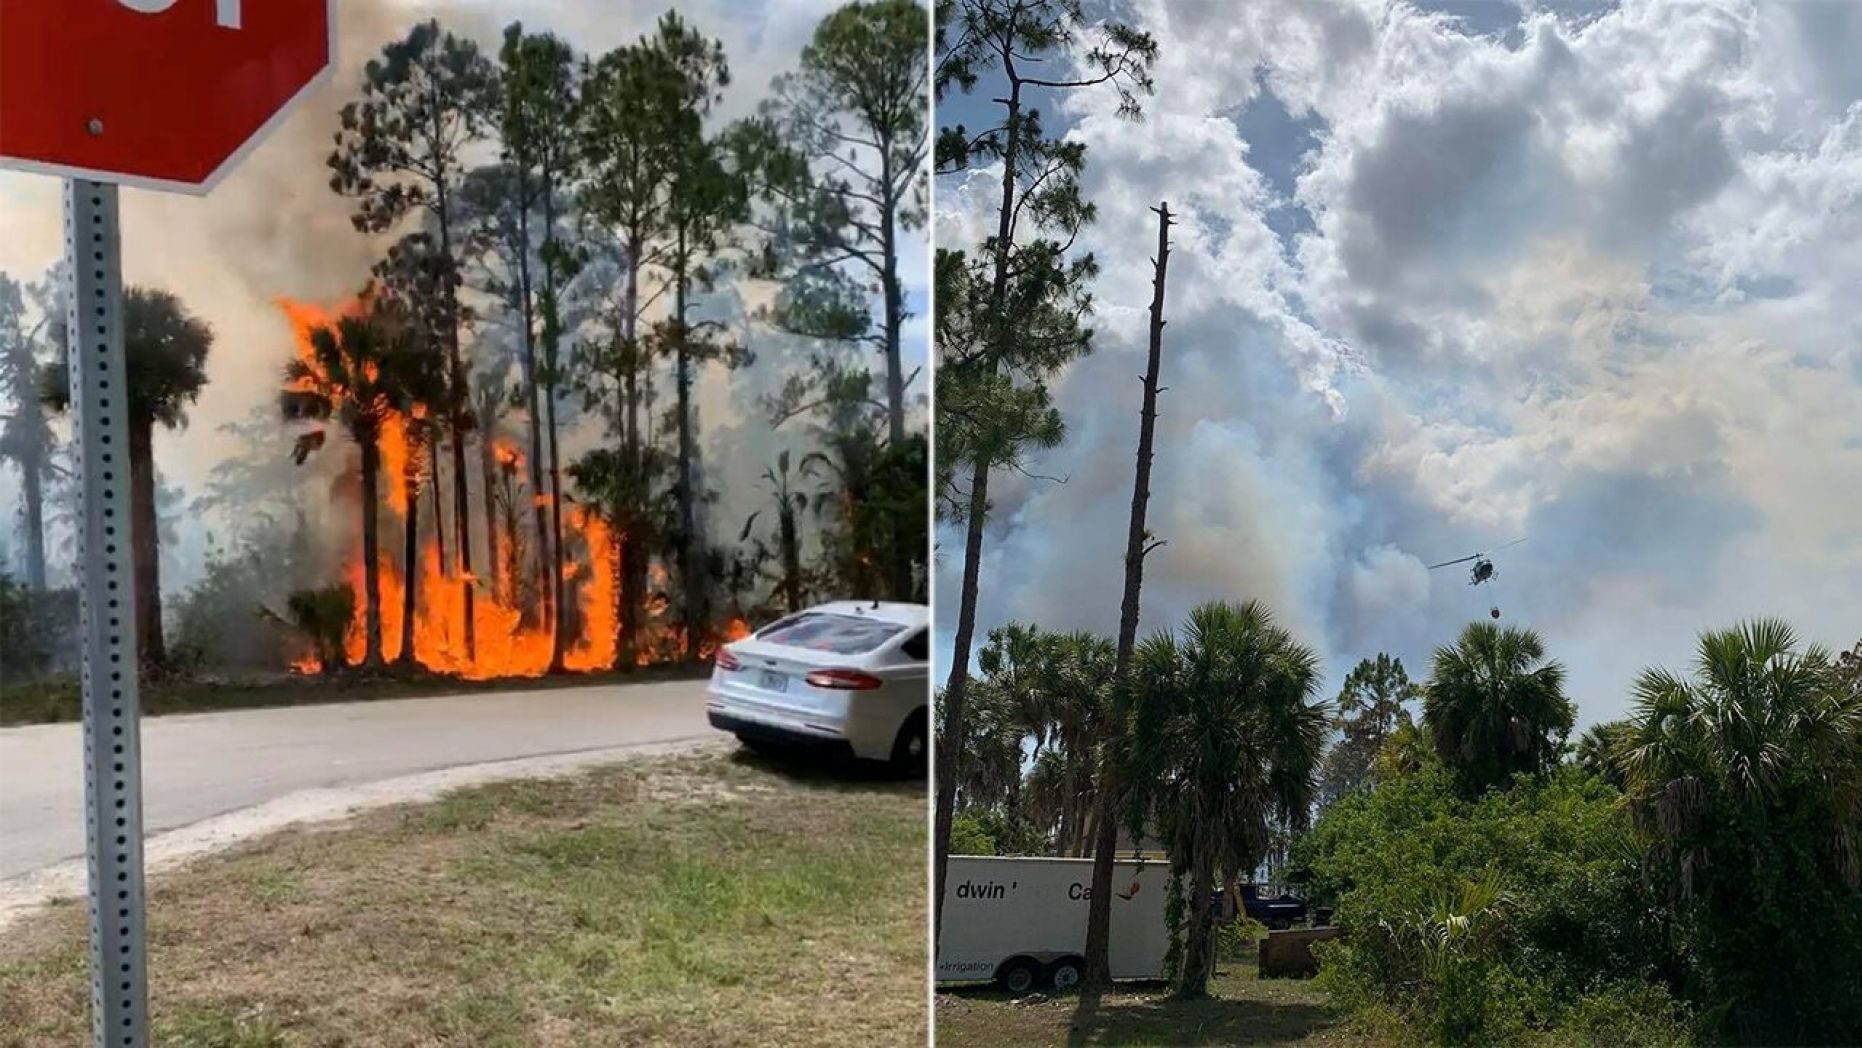 At least 5,000 acres have been after wildfires spread across Southwest Florida on Wednesday.